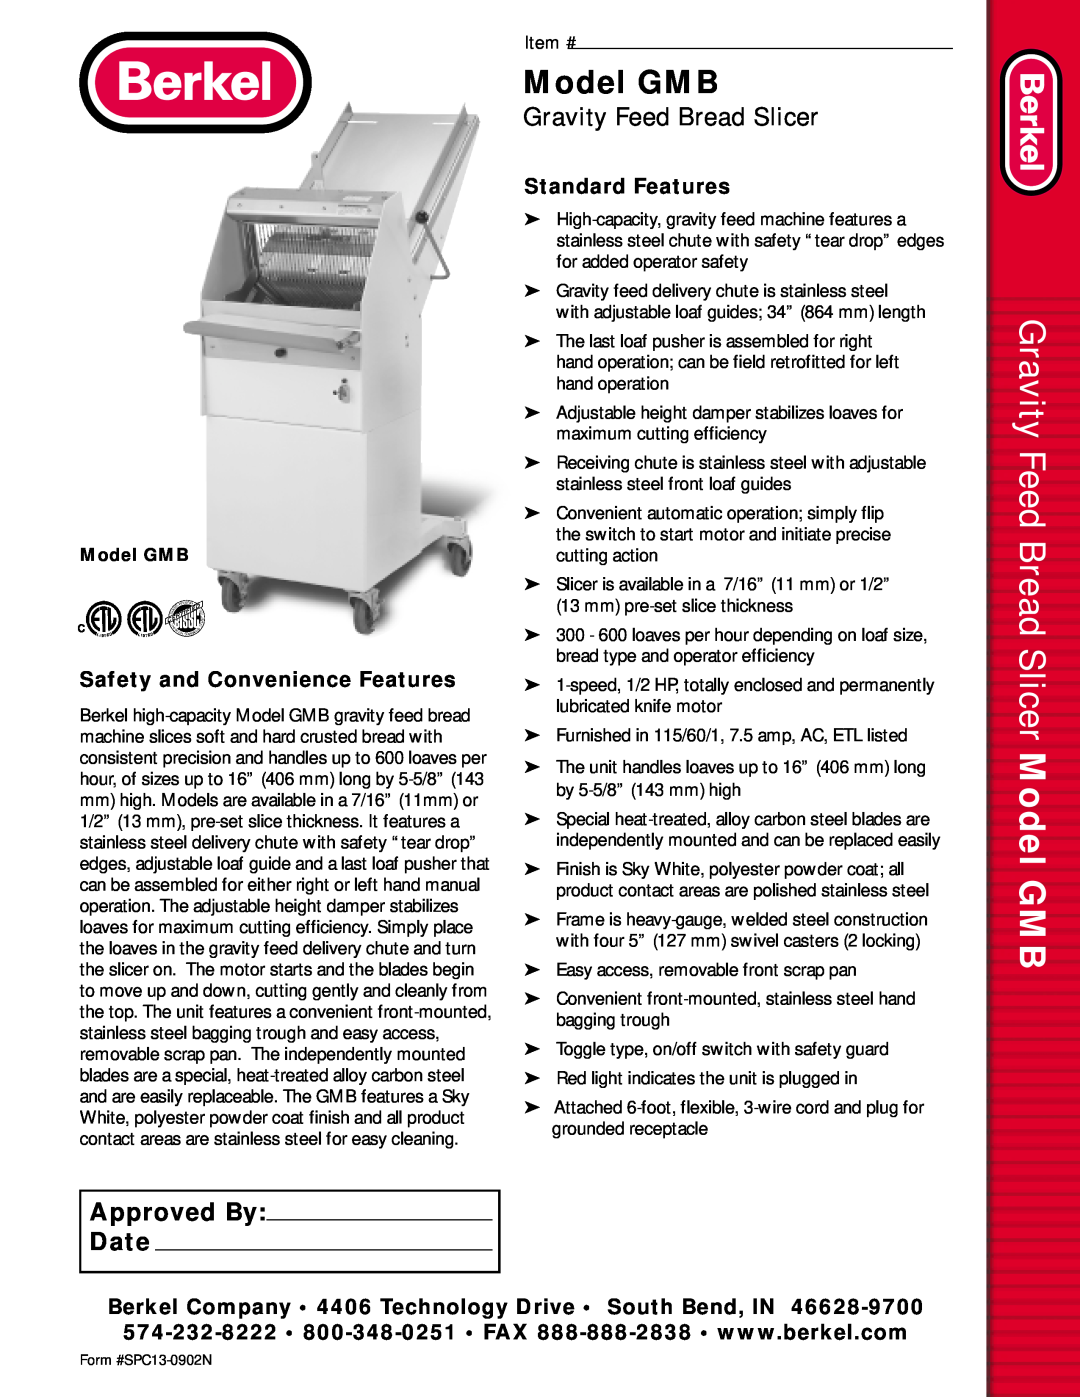 Berkel manual Gravity Feed Bread Slicer, Model GMB, Safety and Convenience Features, Standard Features 